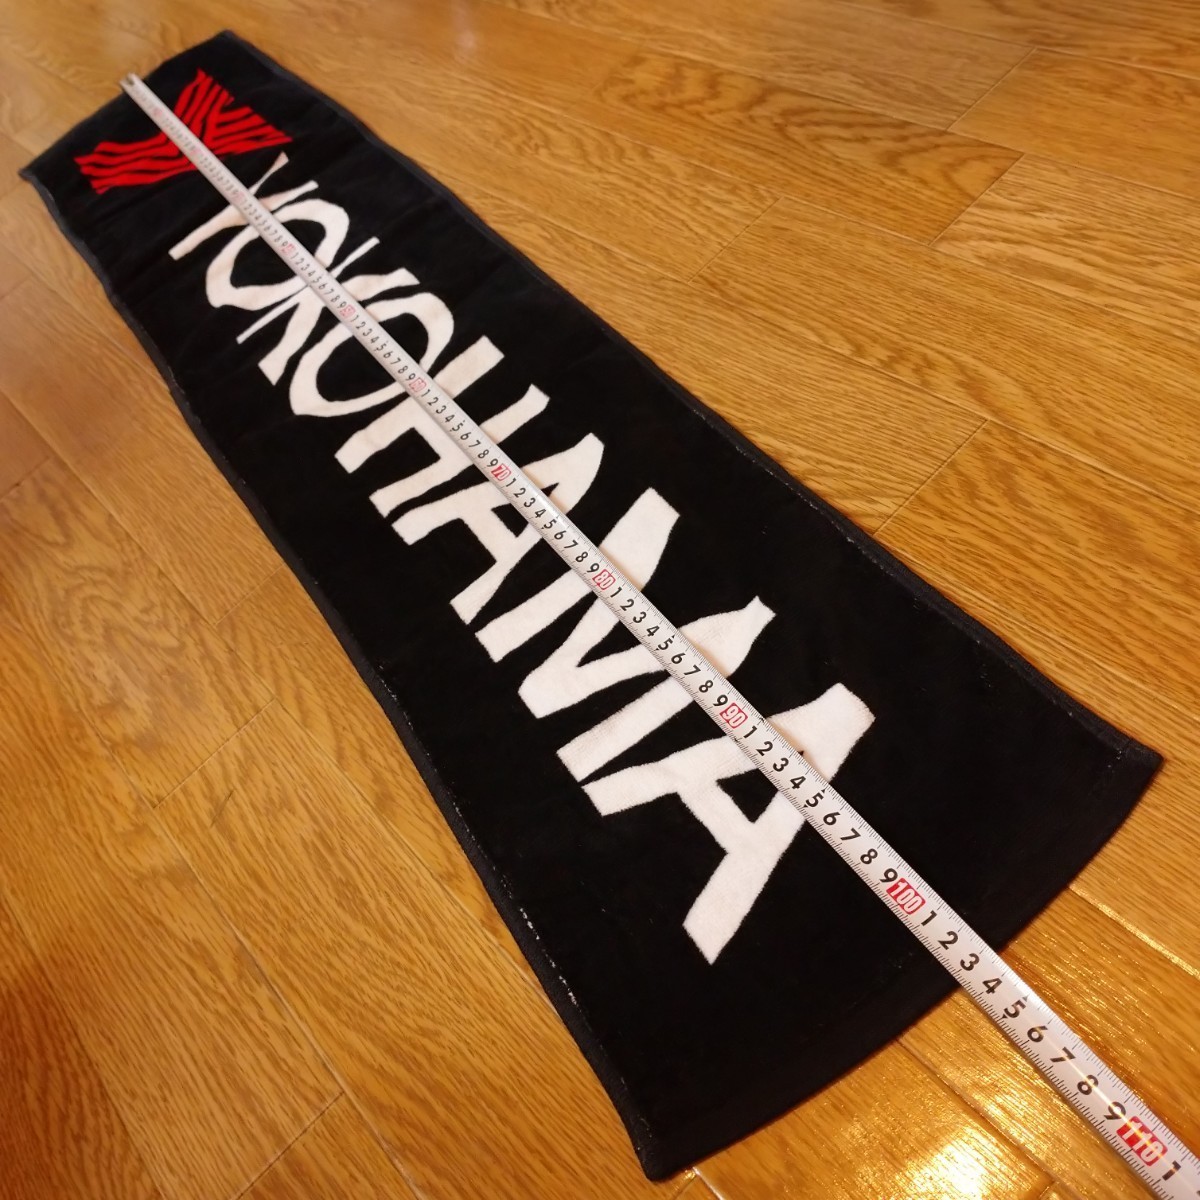 YOKOHAMA TIRE Yokohama Tire Yokohama not for sale towel Logo novelty goods collection tire limitation car limited advan collection 3